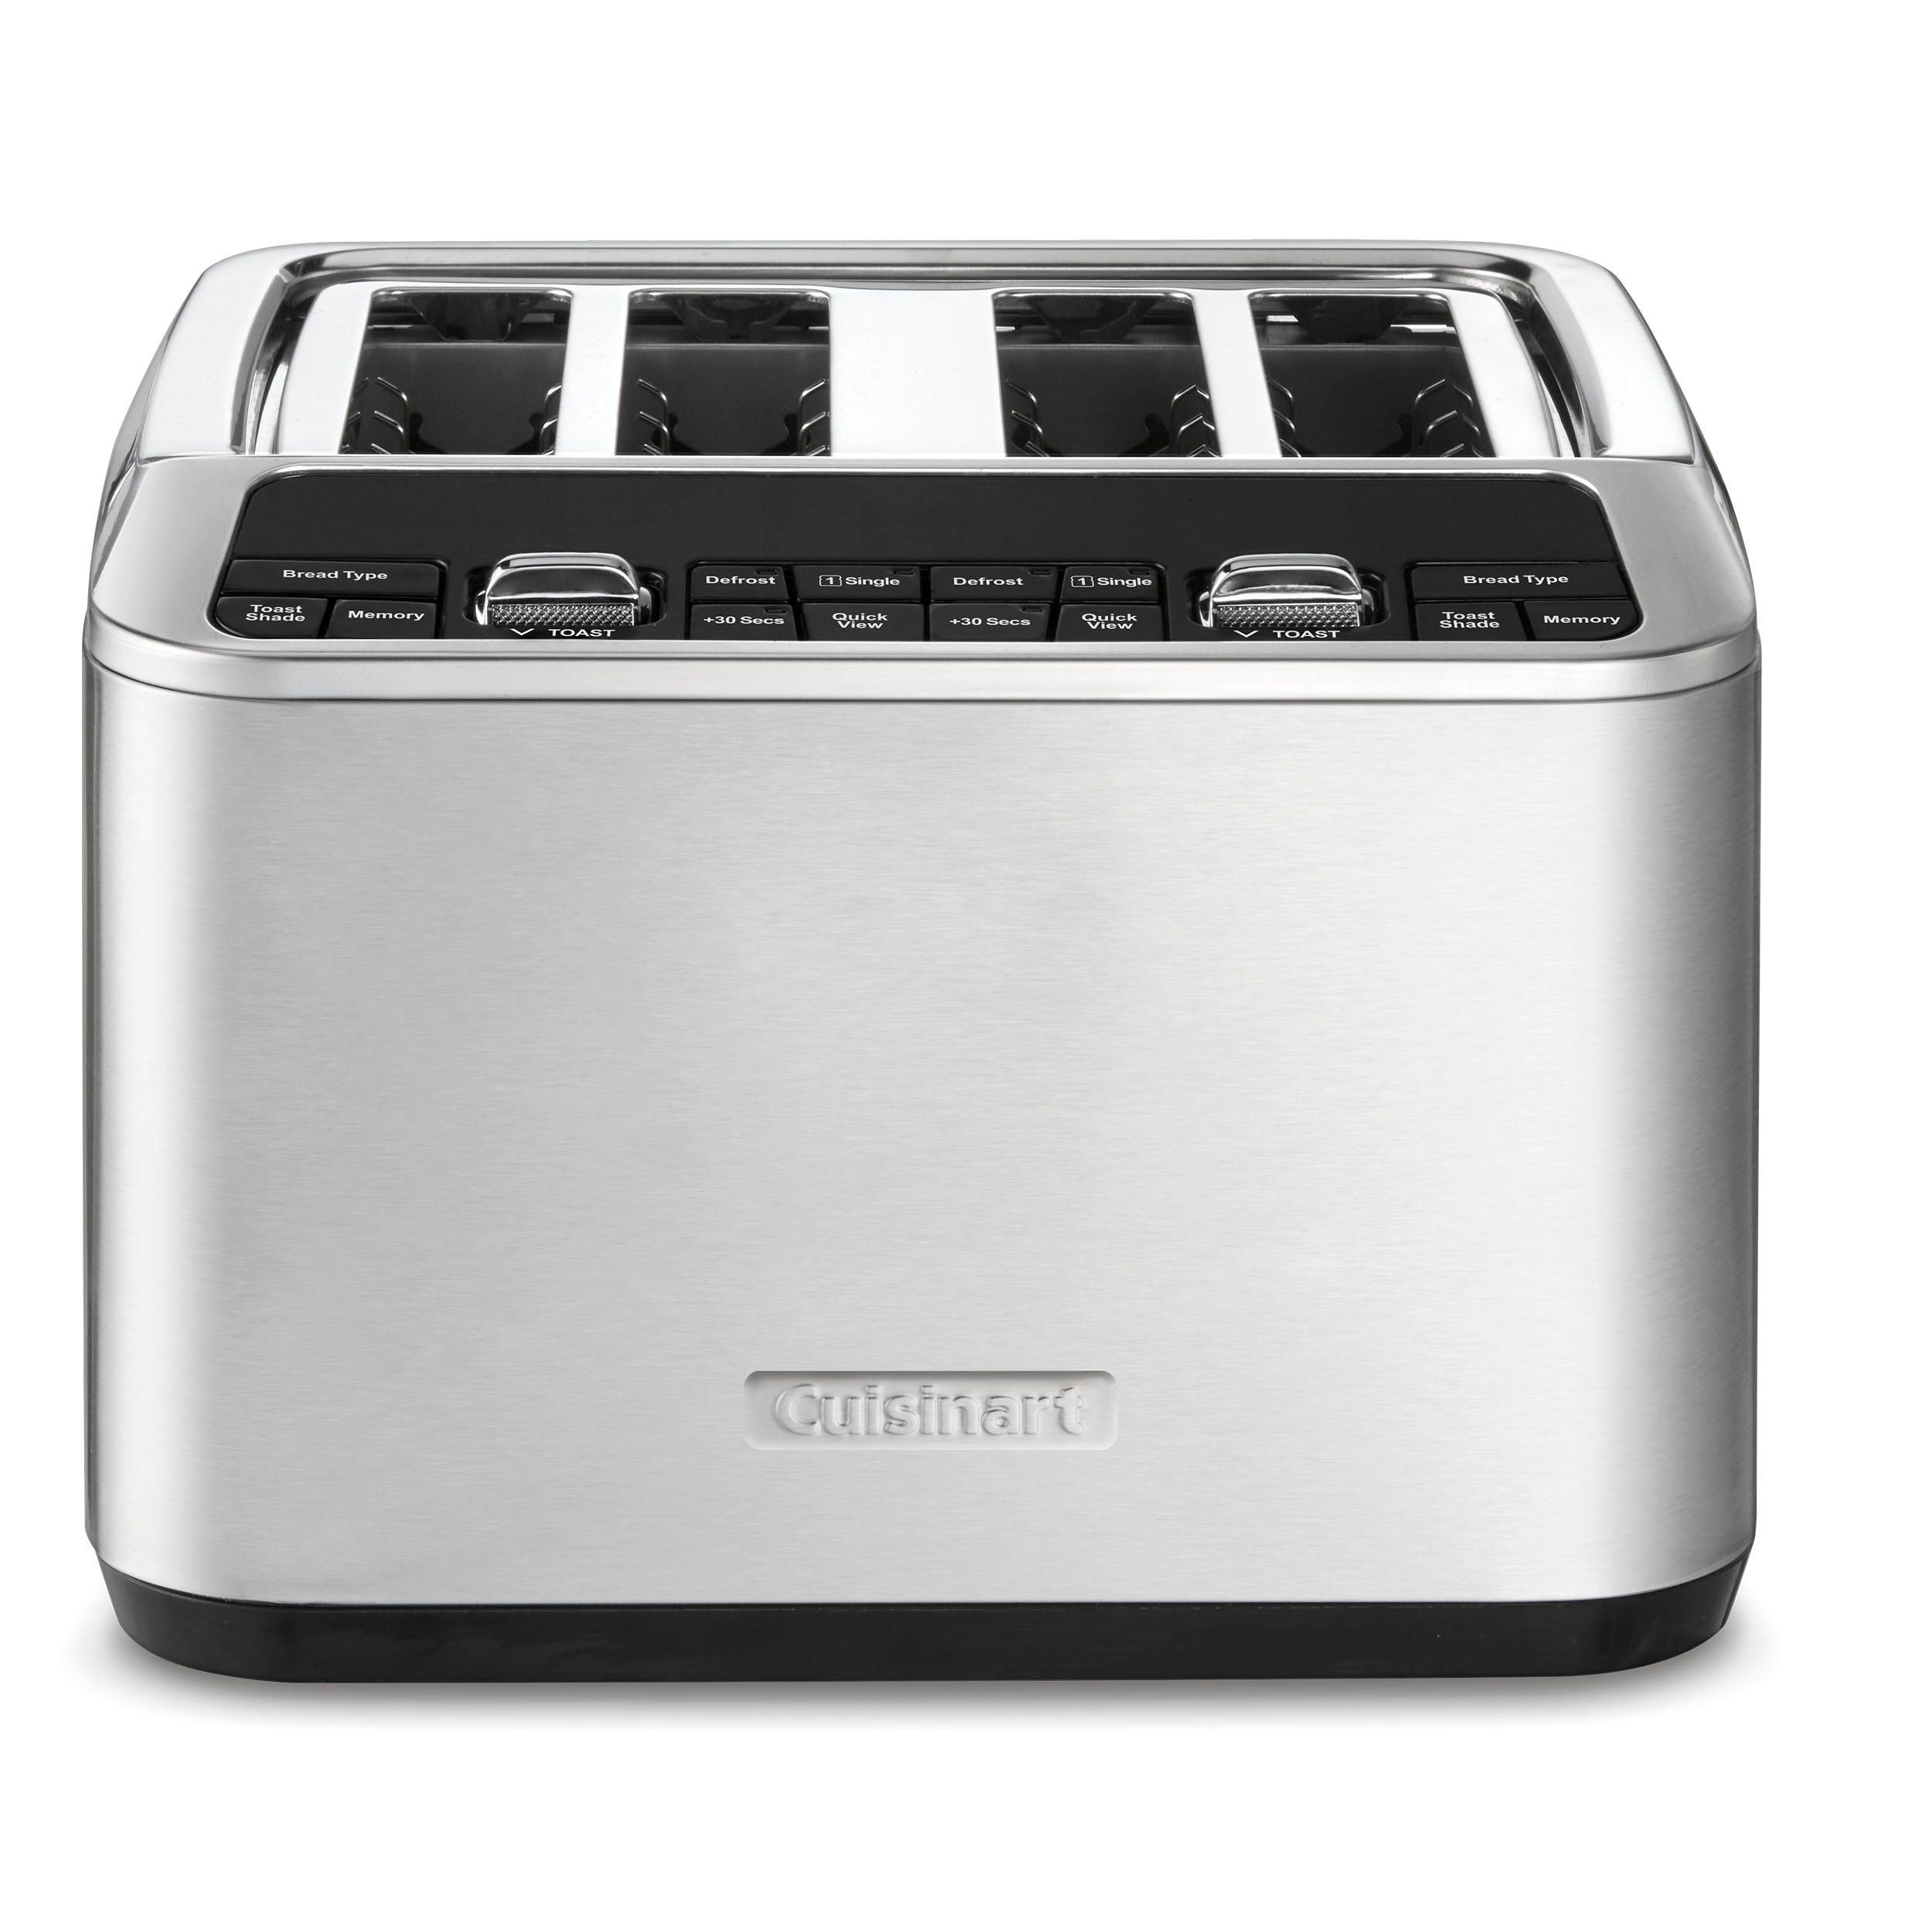 Bread Toasters & Pop Up Toasters 